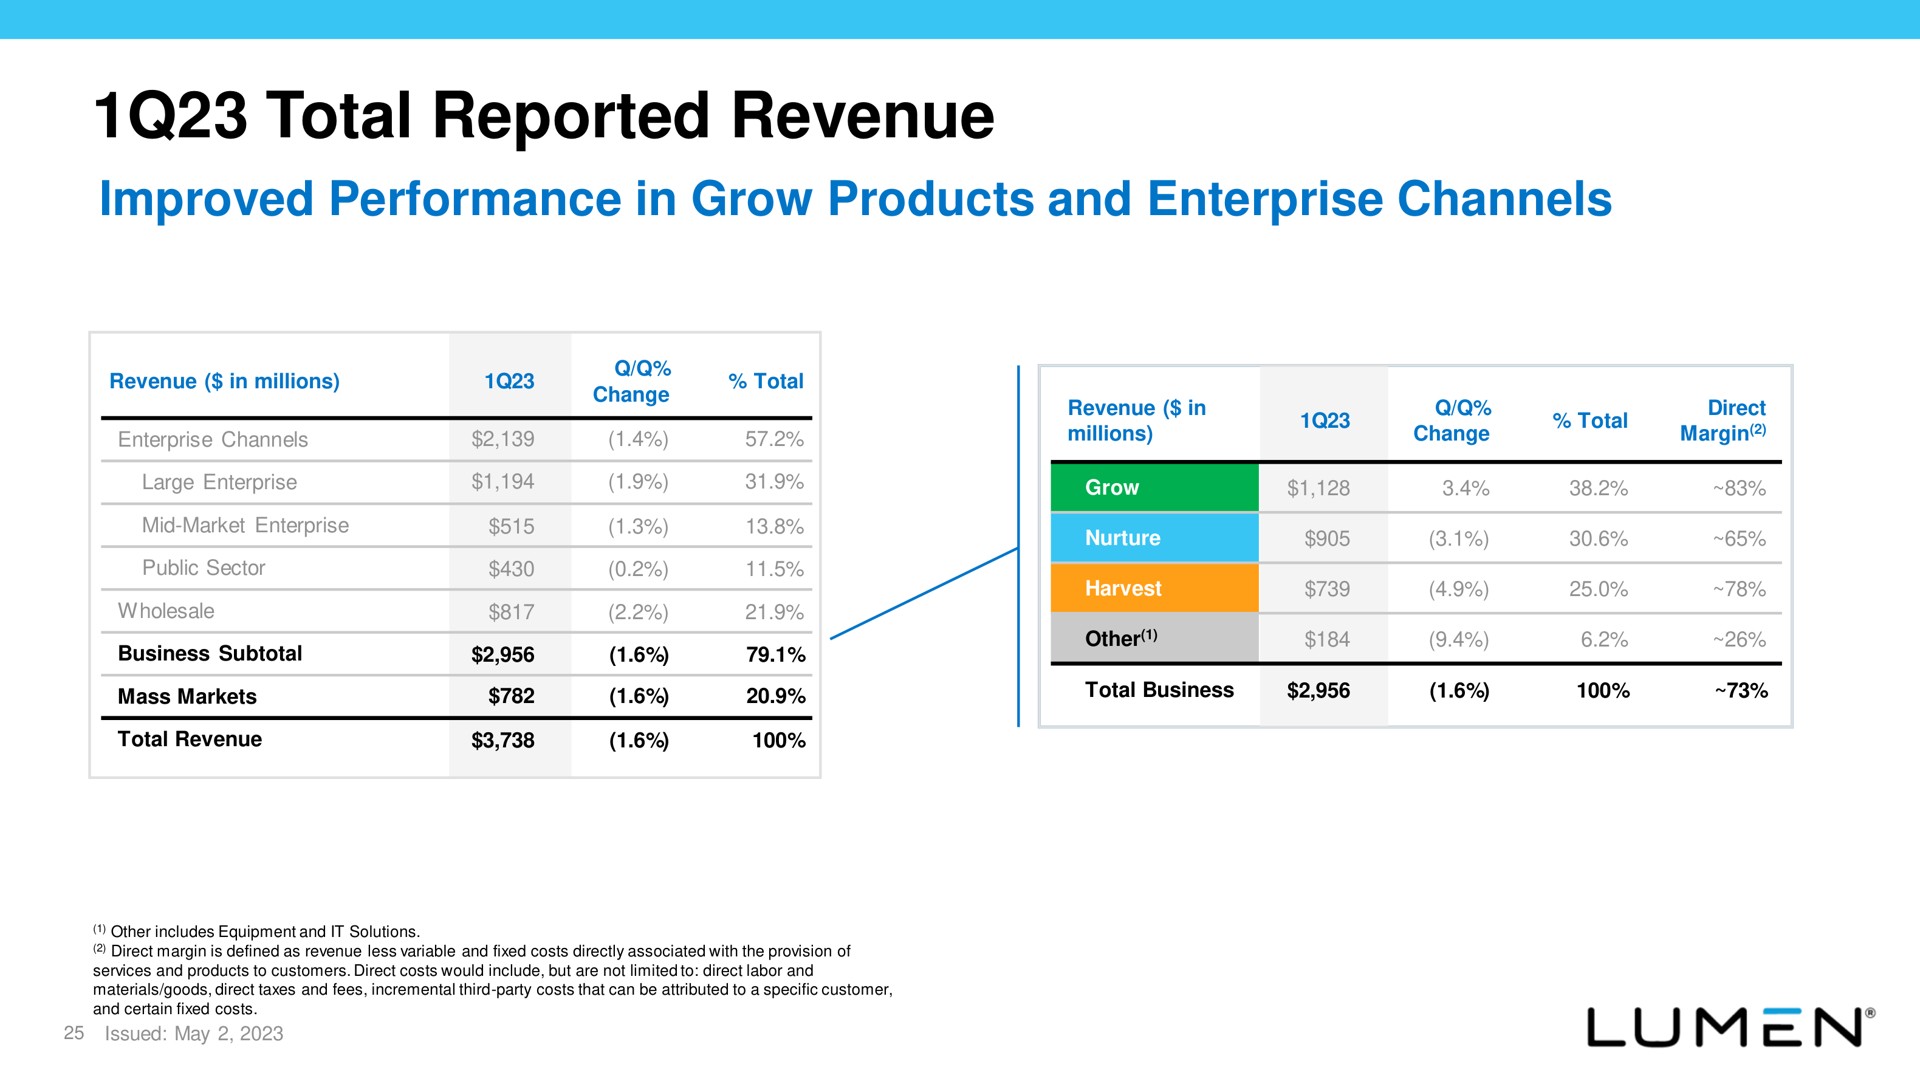 total reported revenue improved performance in grow products and enterprise channels | Lumen